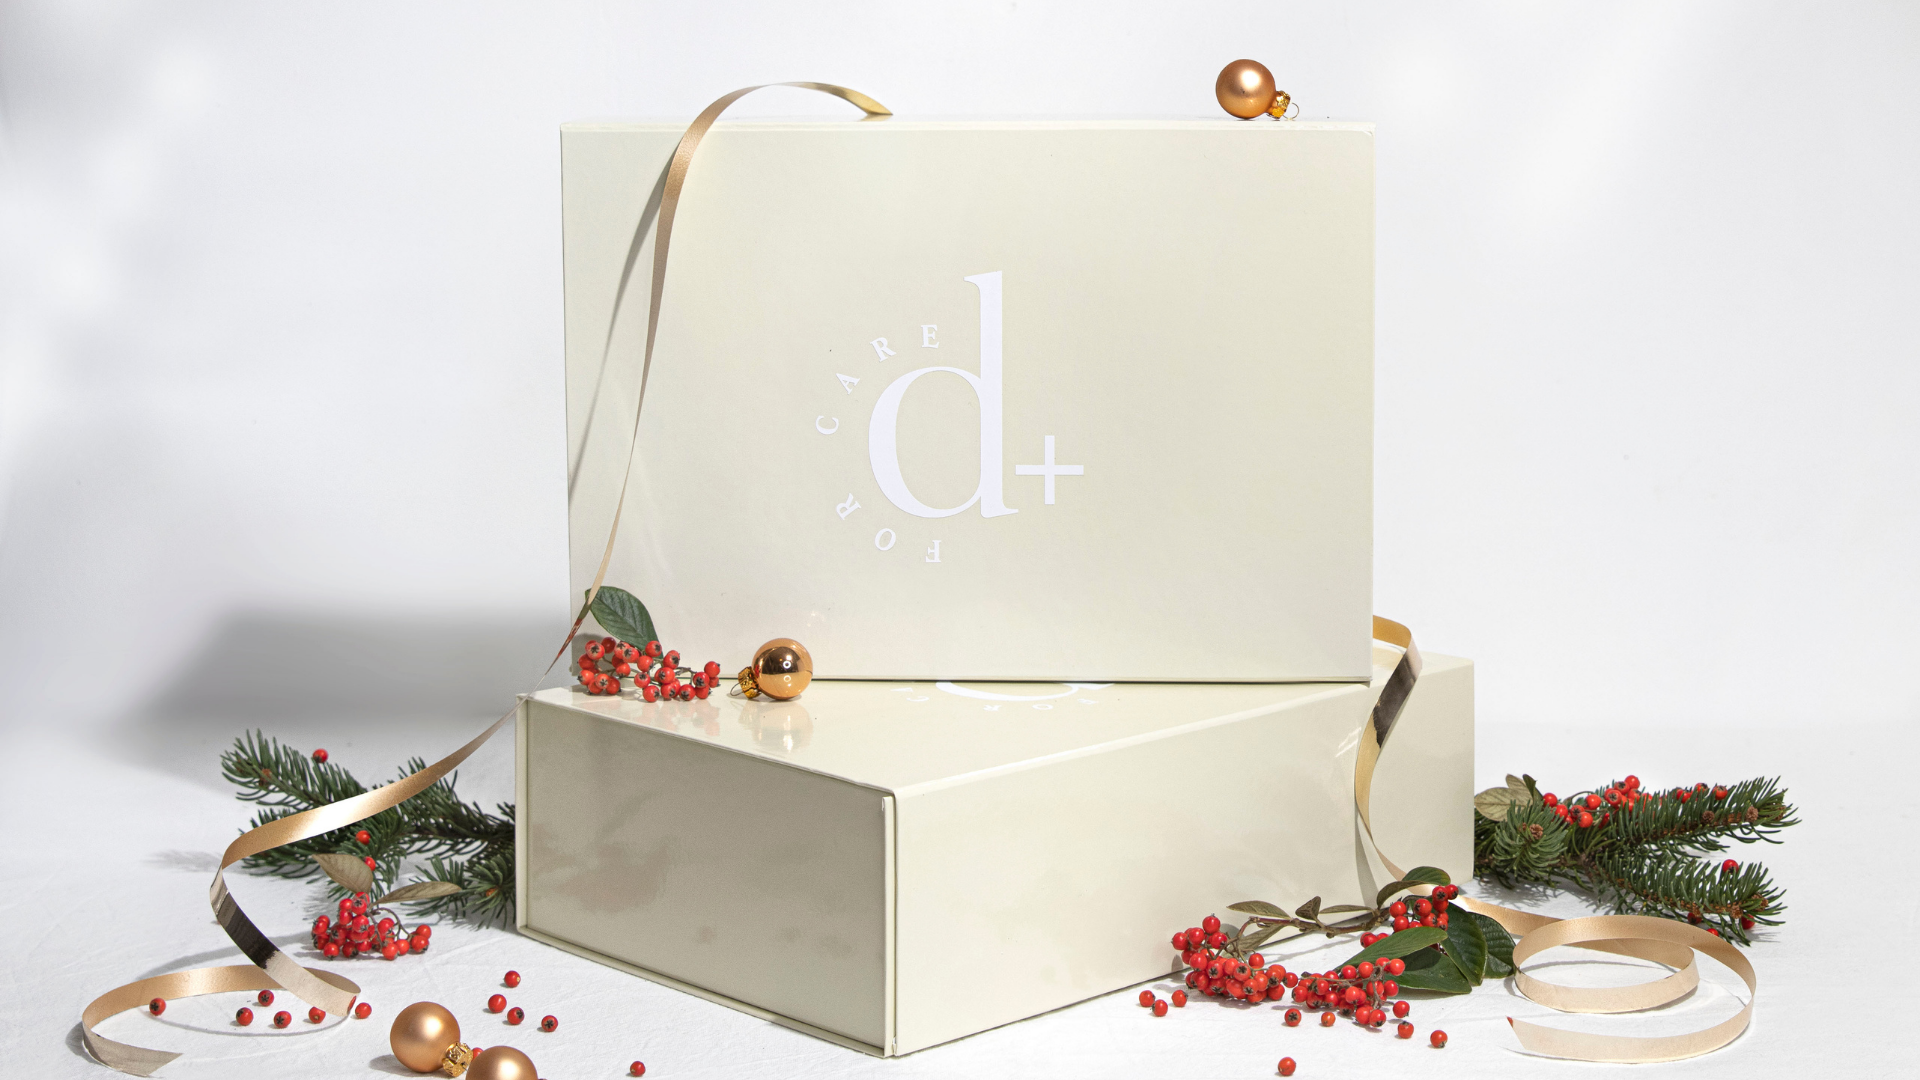 Christmas Gift Guide: D+ for care's selection of gift ideas for Christmas